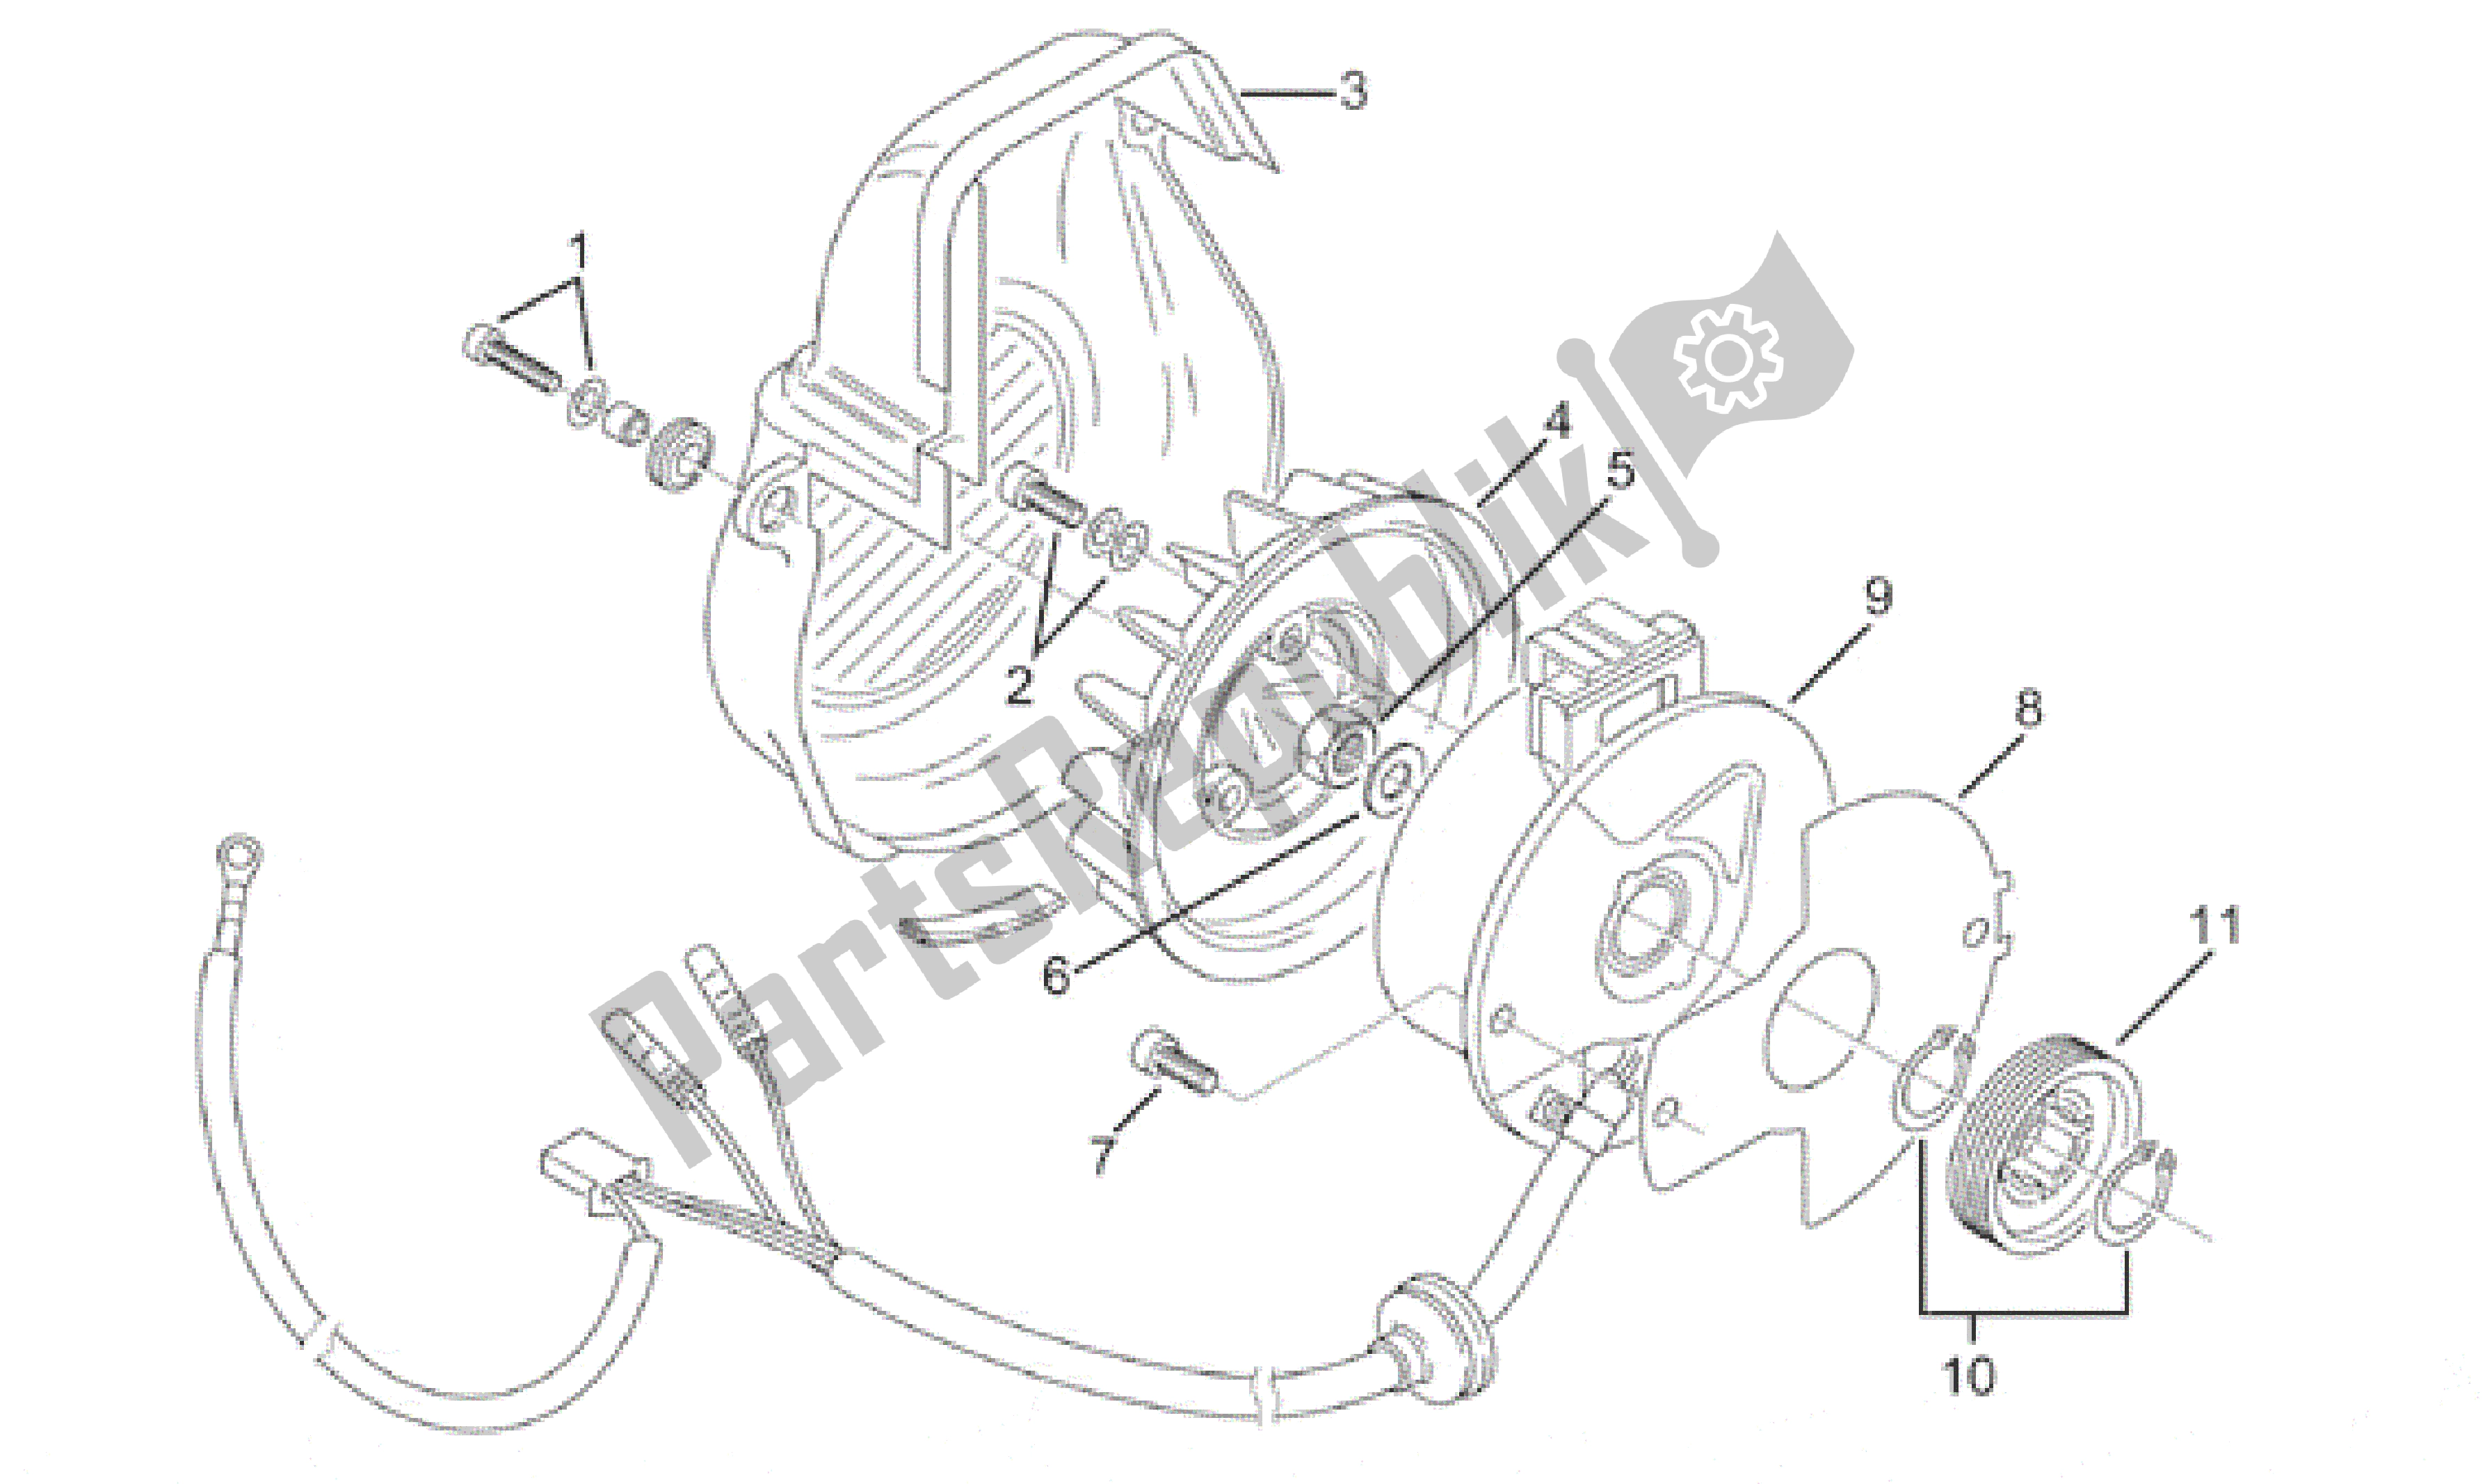 All parts for the Flywheel of the Aprilia Amico 50 1996 - 1998